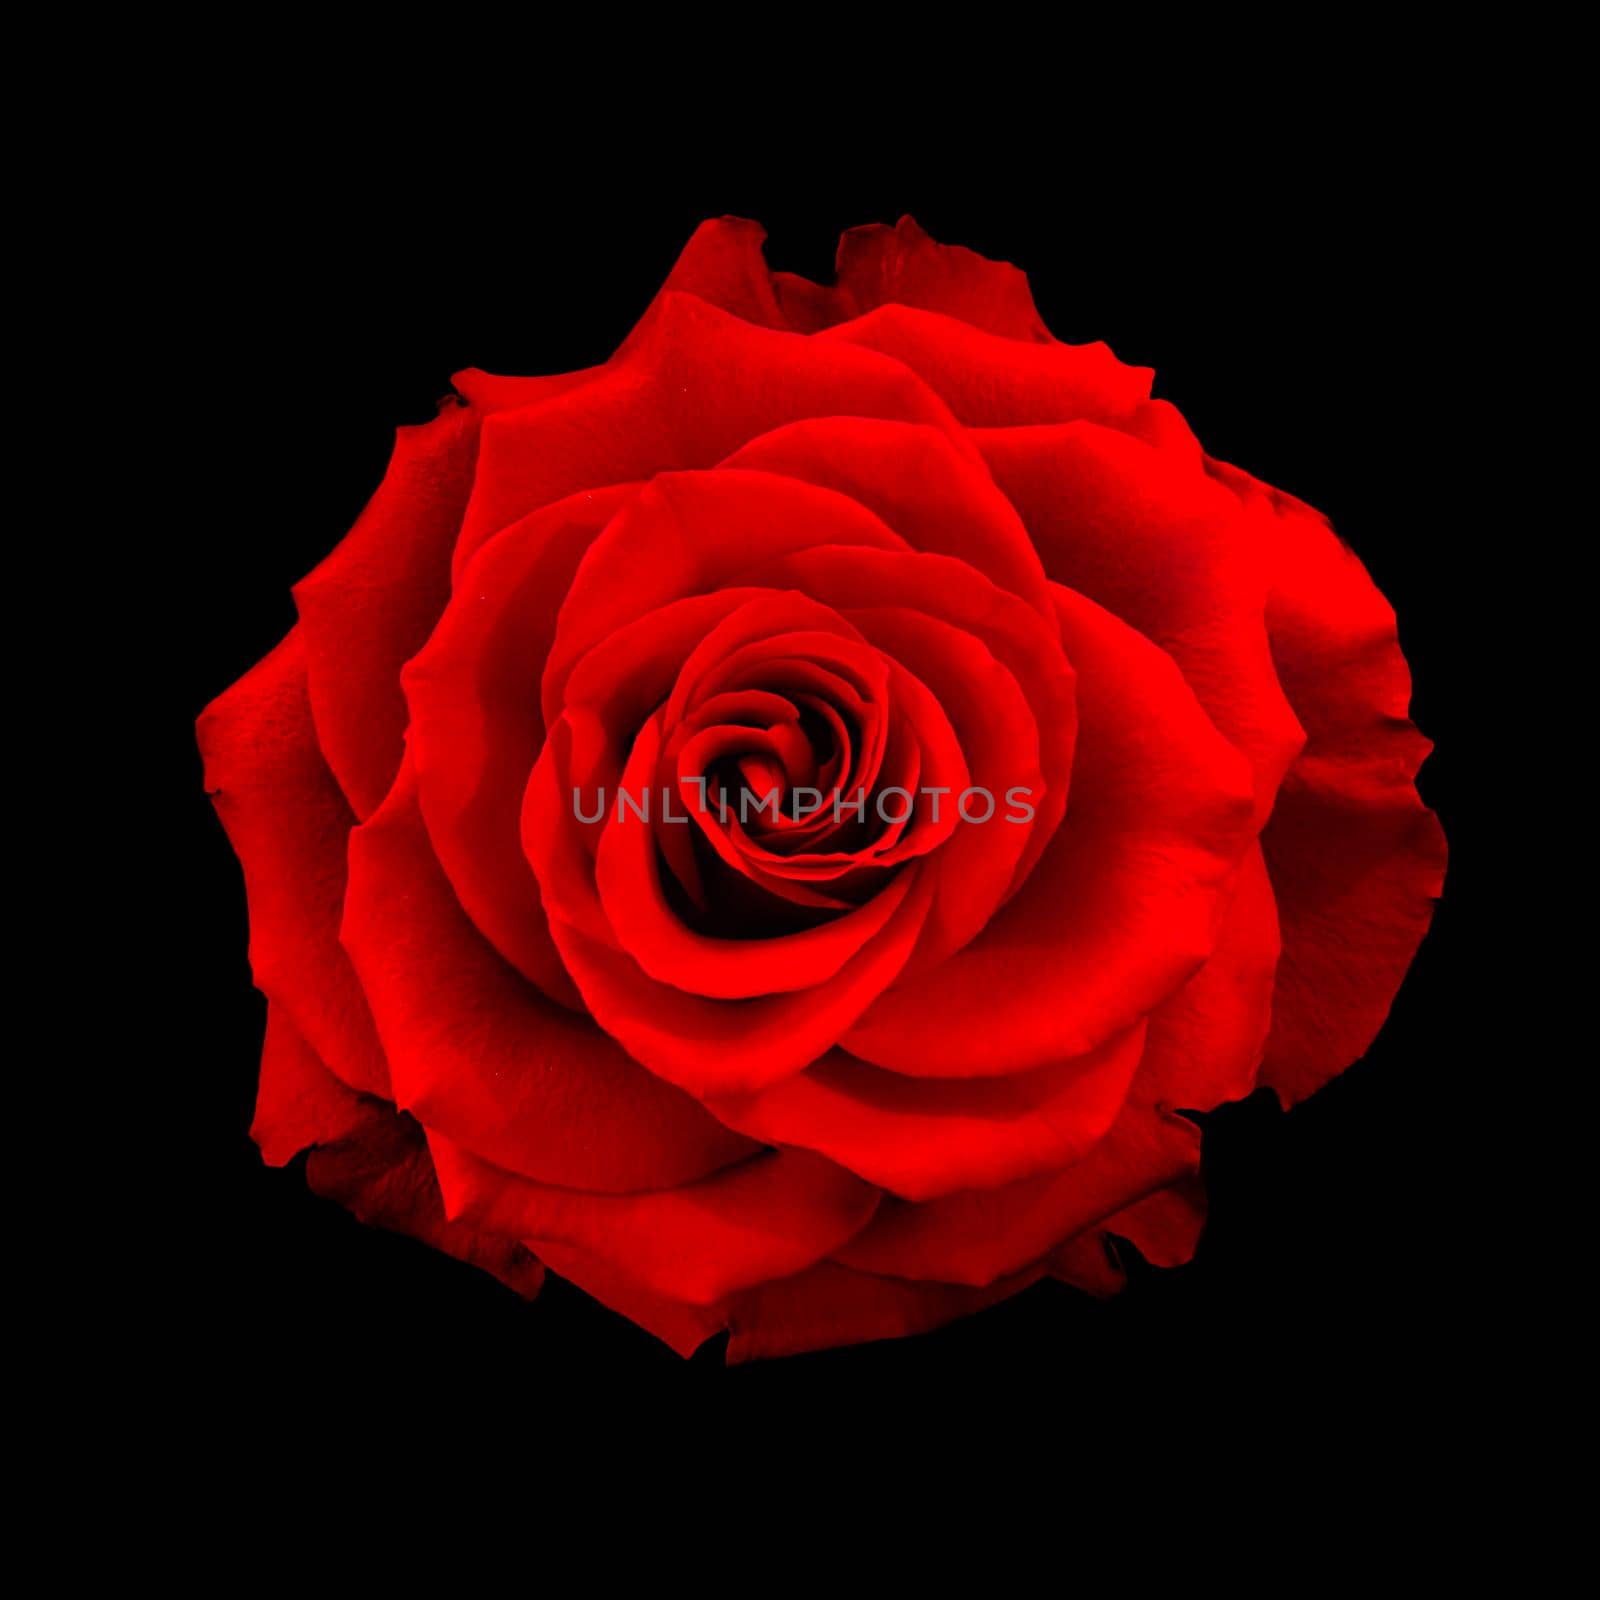 Red Rose by catoroed